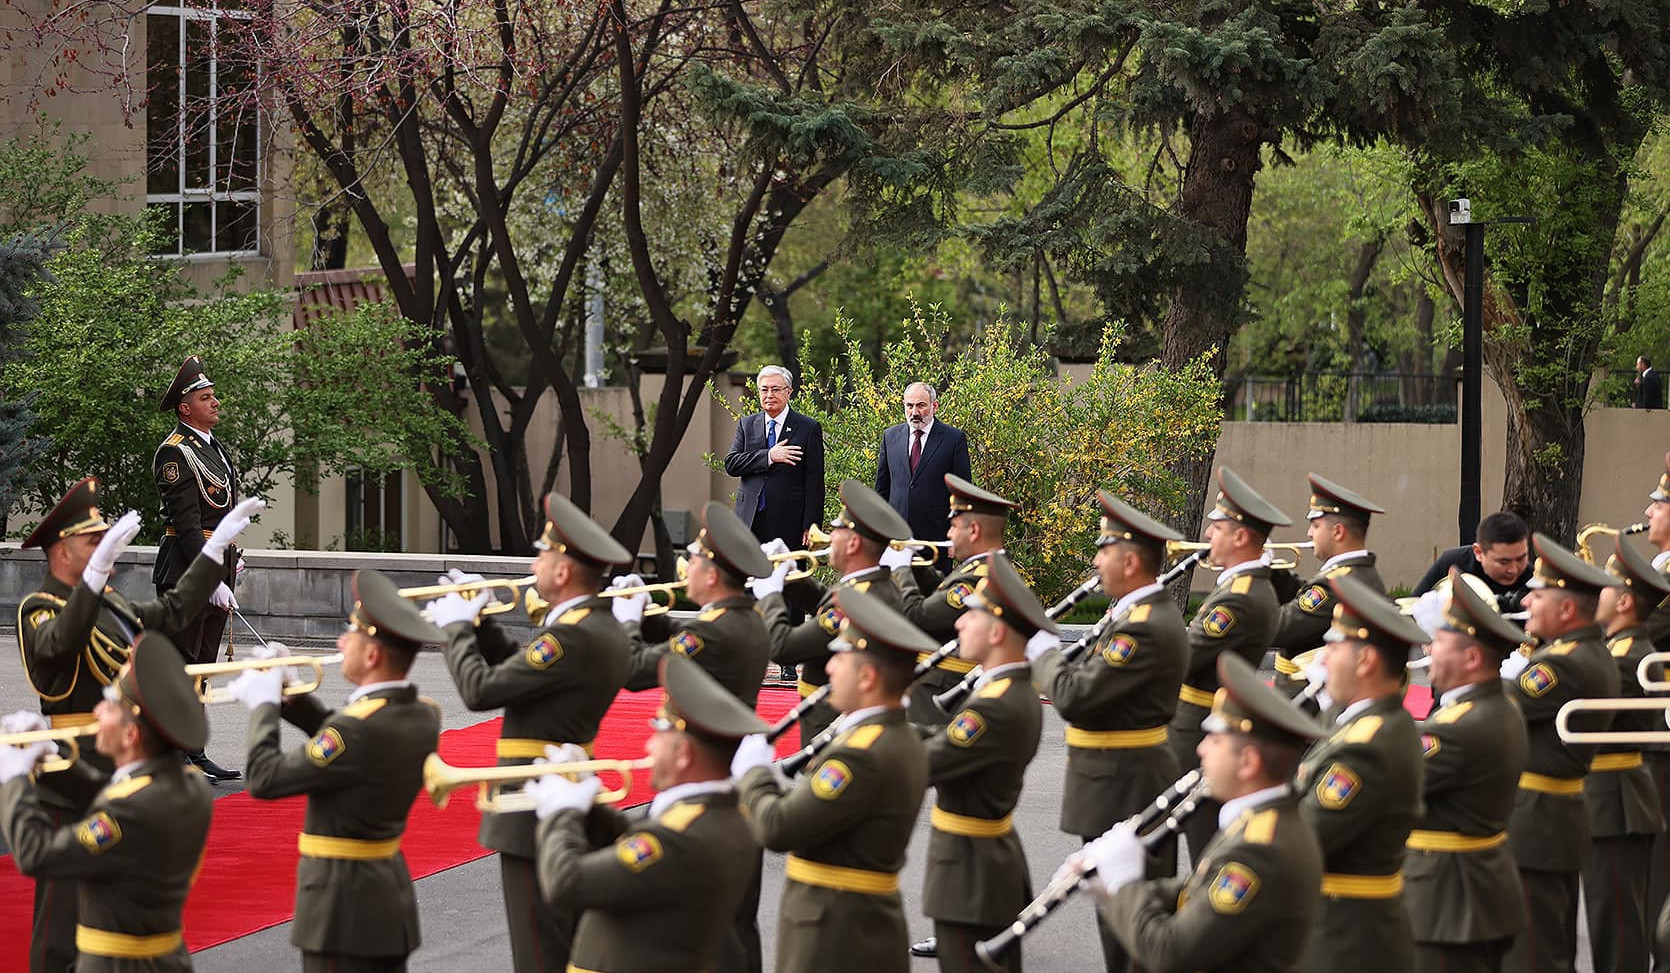 Welcoming ceremony of President of Kazakhstan, who arrived in Armenia, with photos